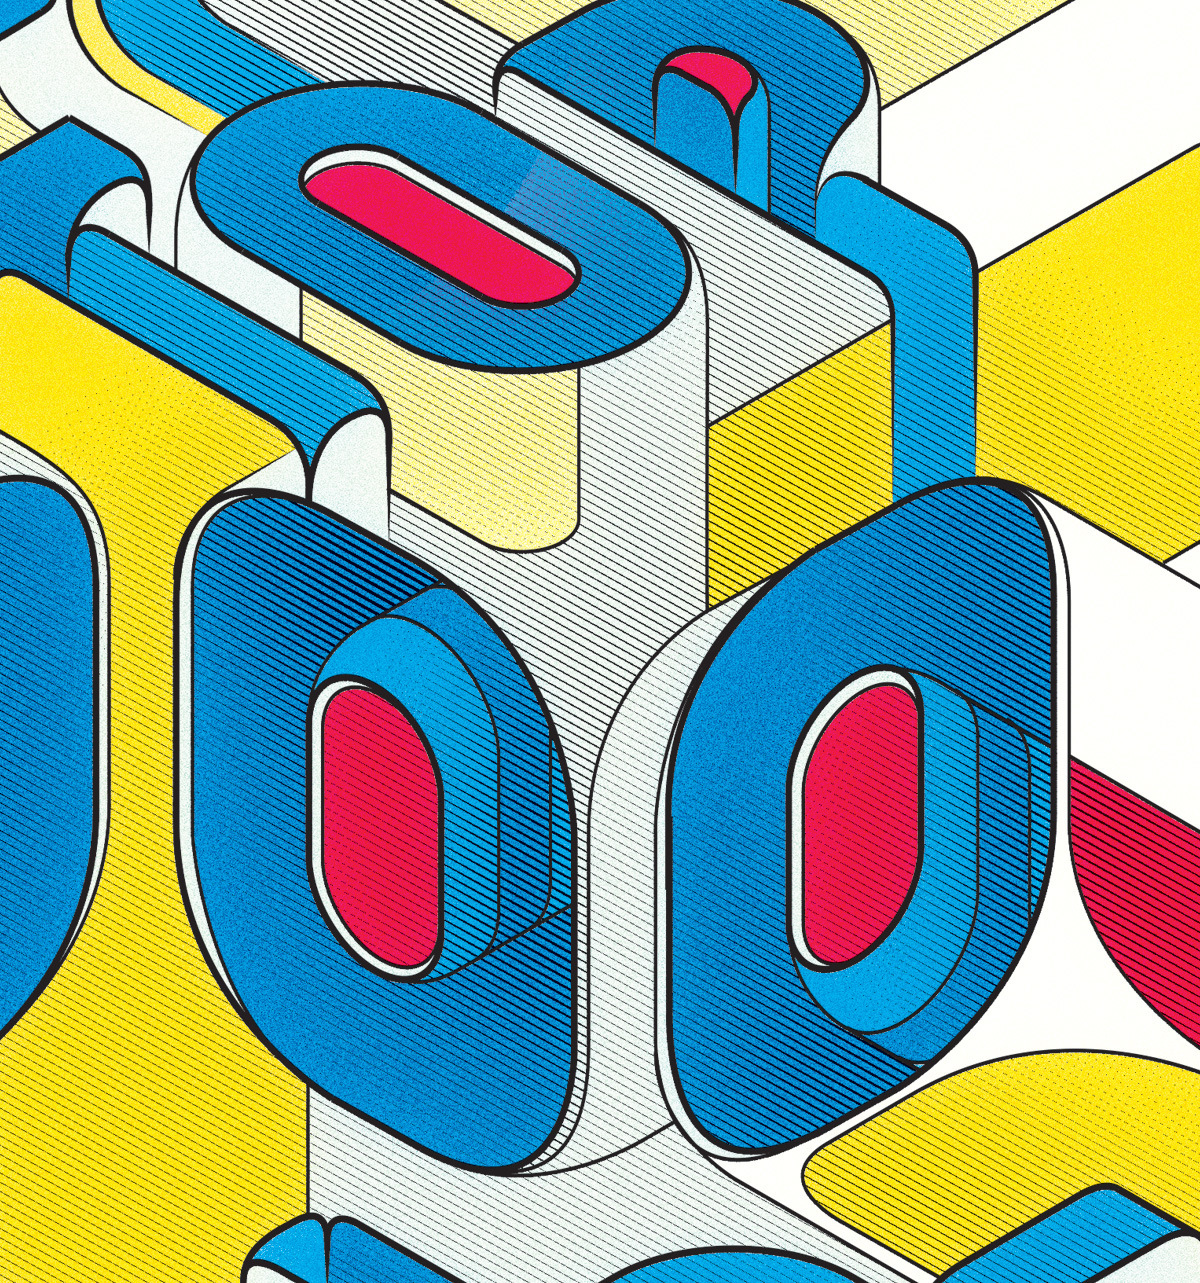 type covers magazine cover Isometric 3D depth ribbons stripes creativereview creative charleswilliams vector Illustrator editorial